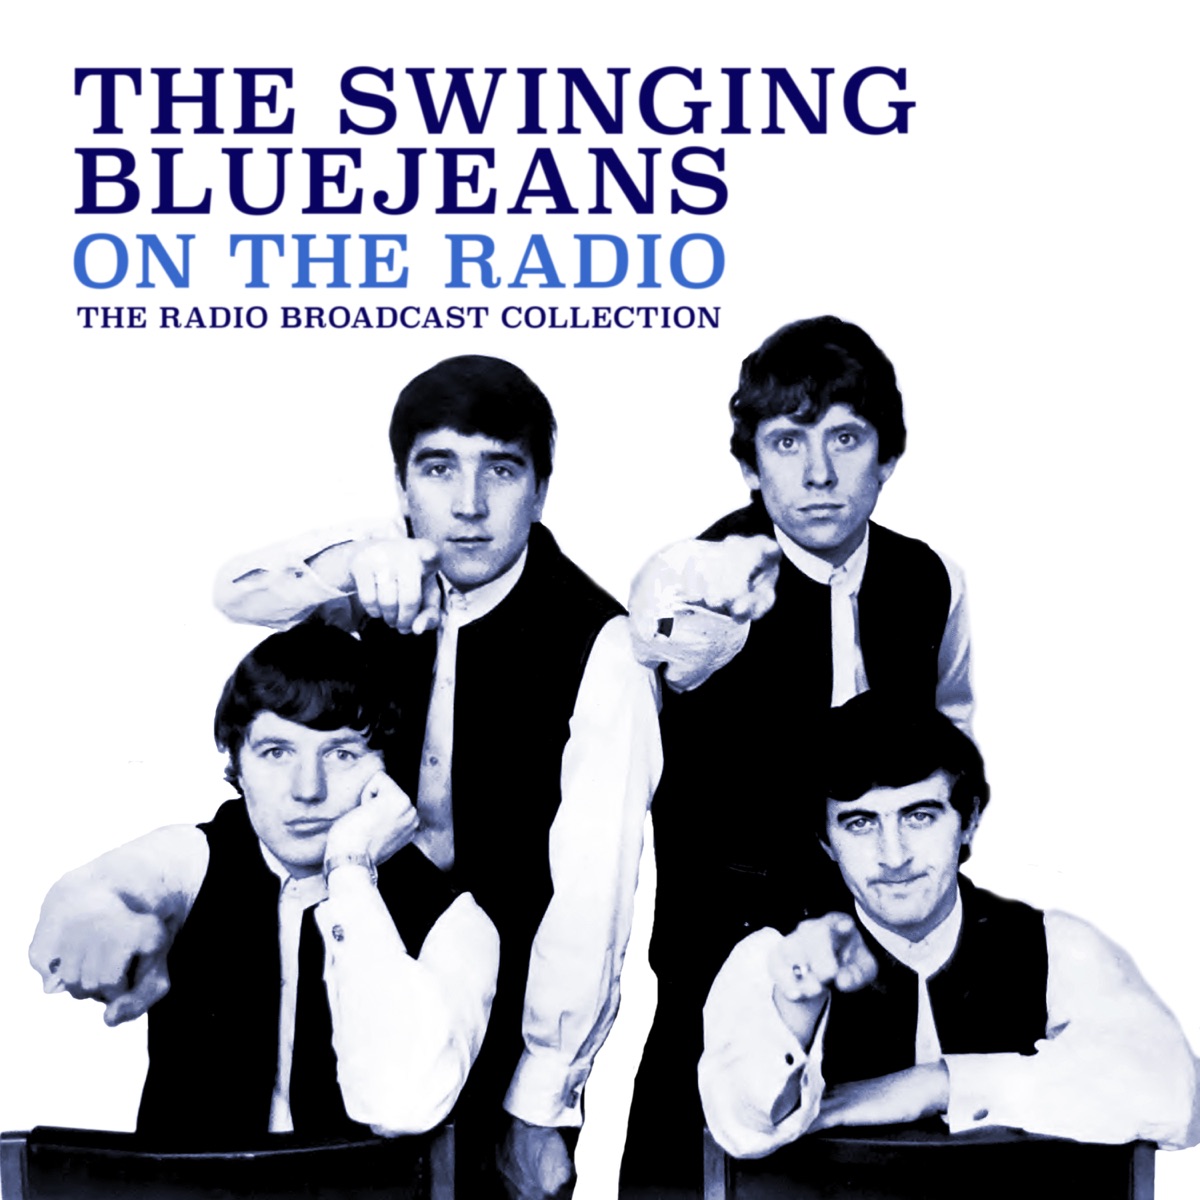 On the Radio (Live) - Album by The Swinging Blue Jeans - Apple Music